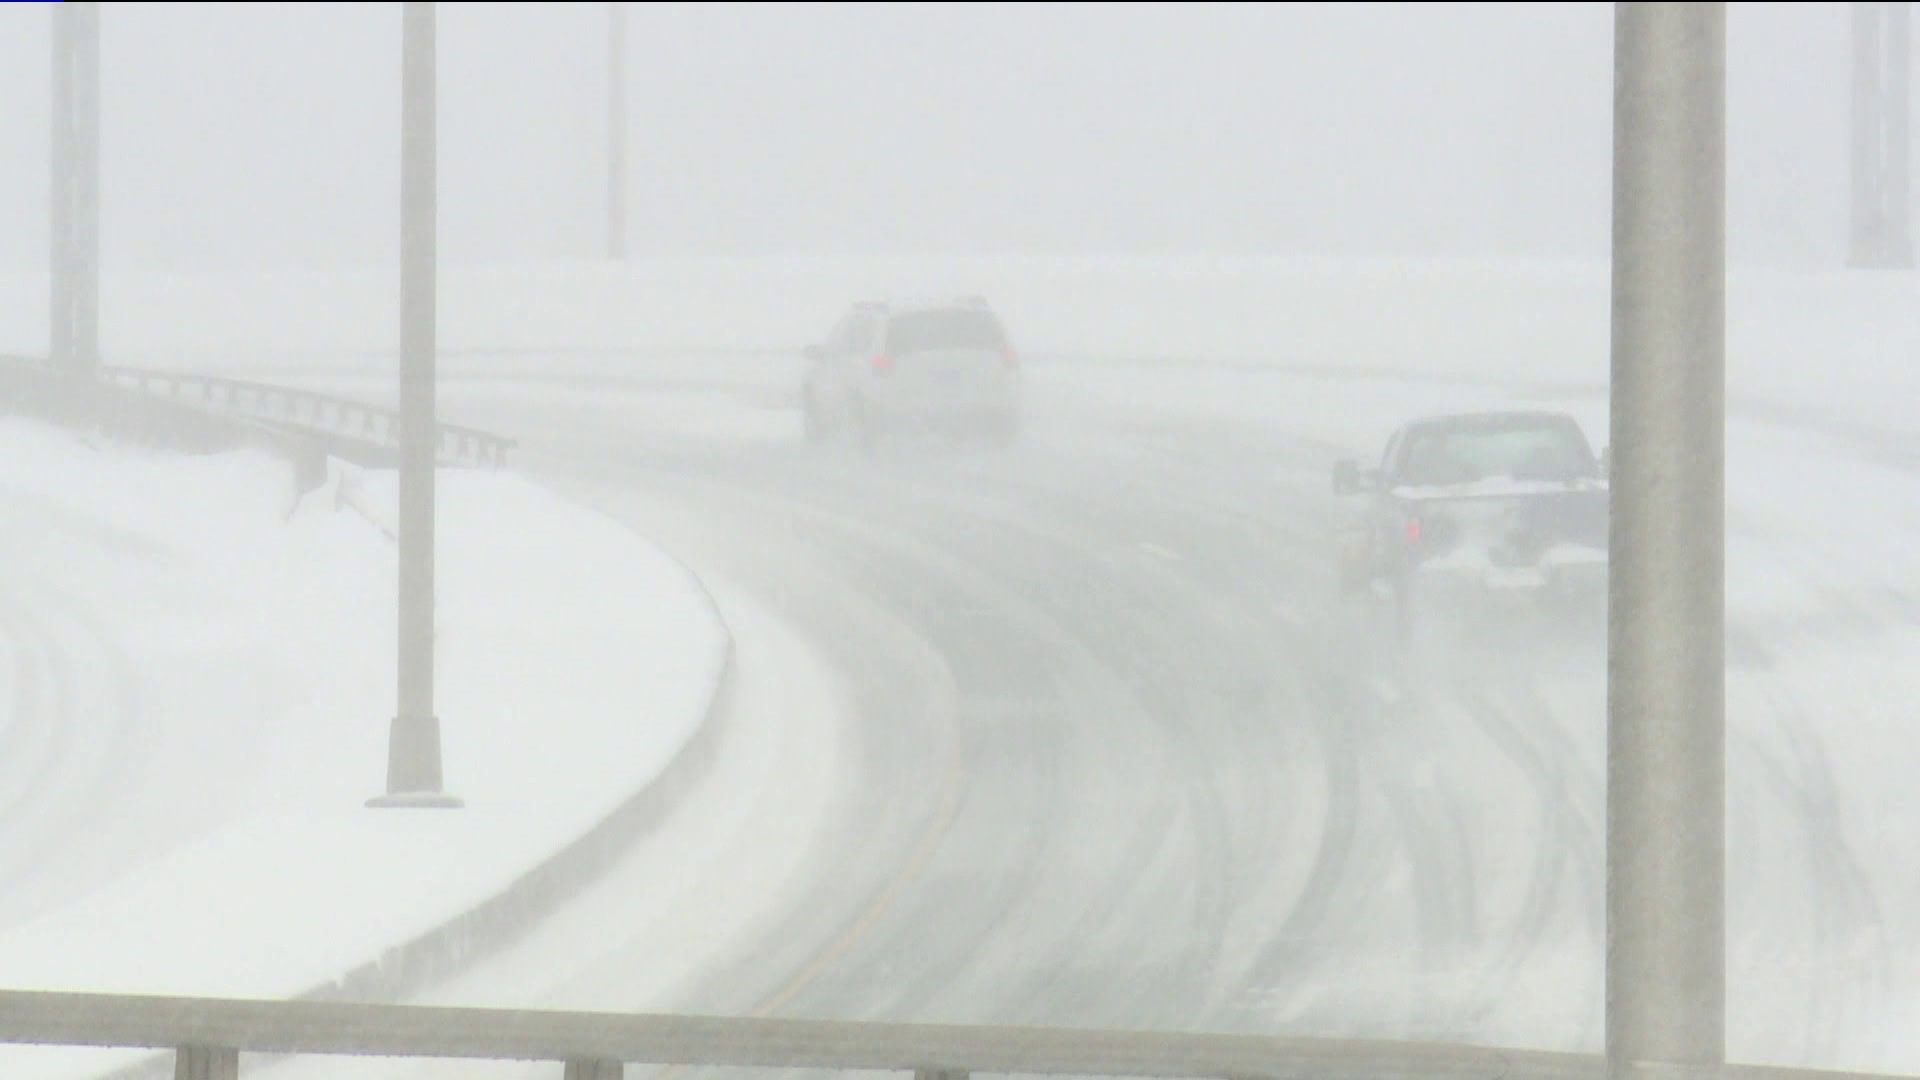 Connecticut DOT give driver safety tips for the winter storm